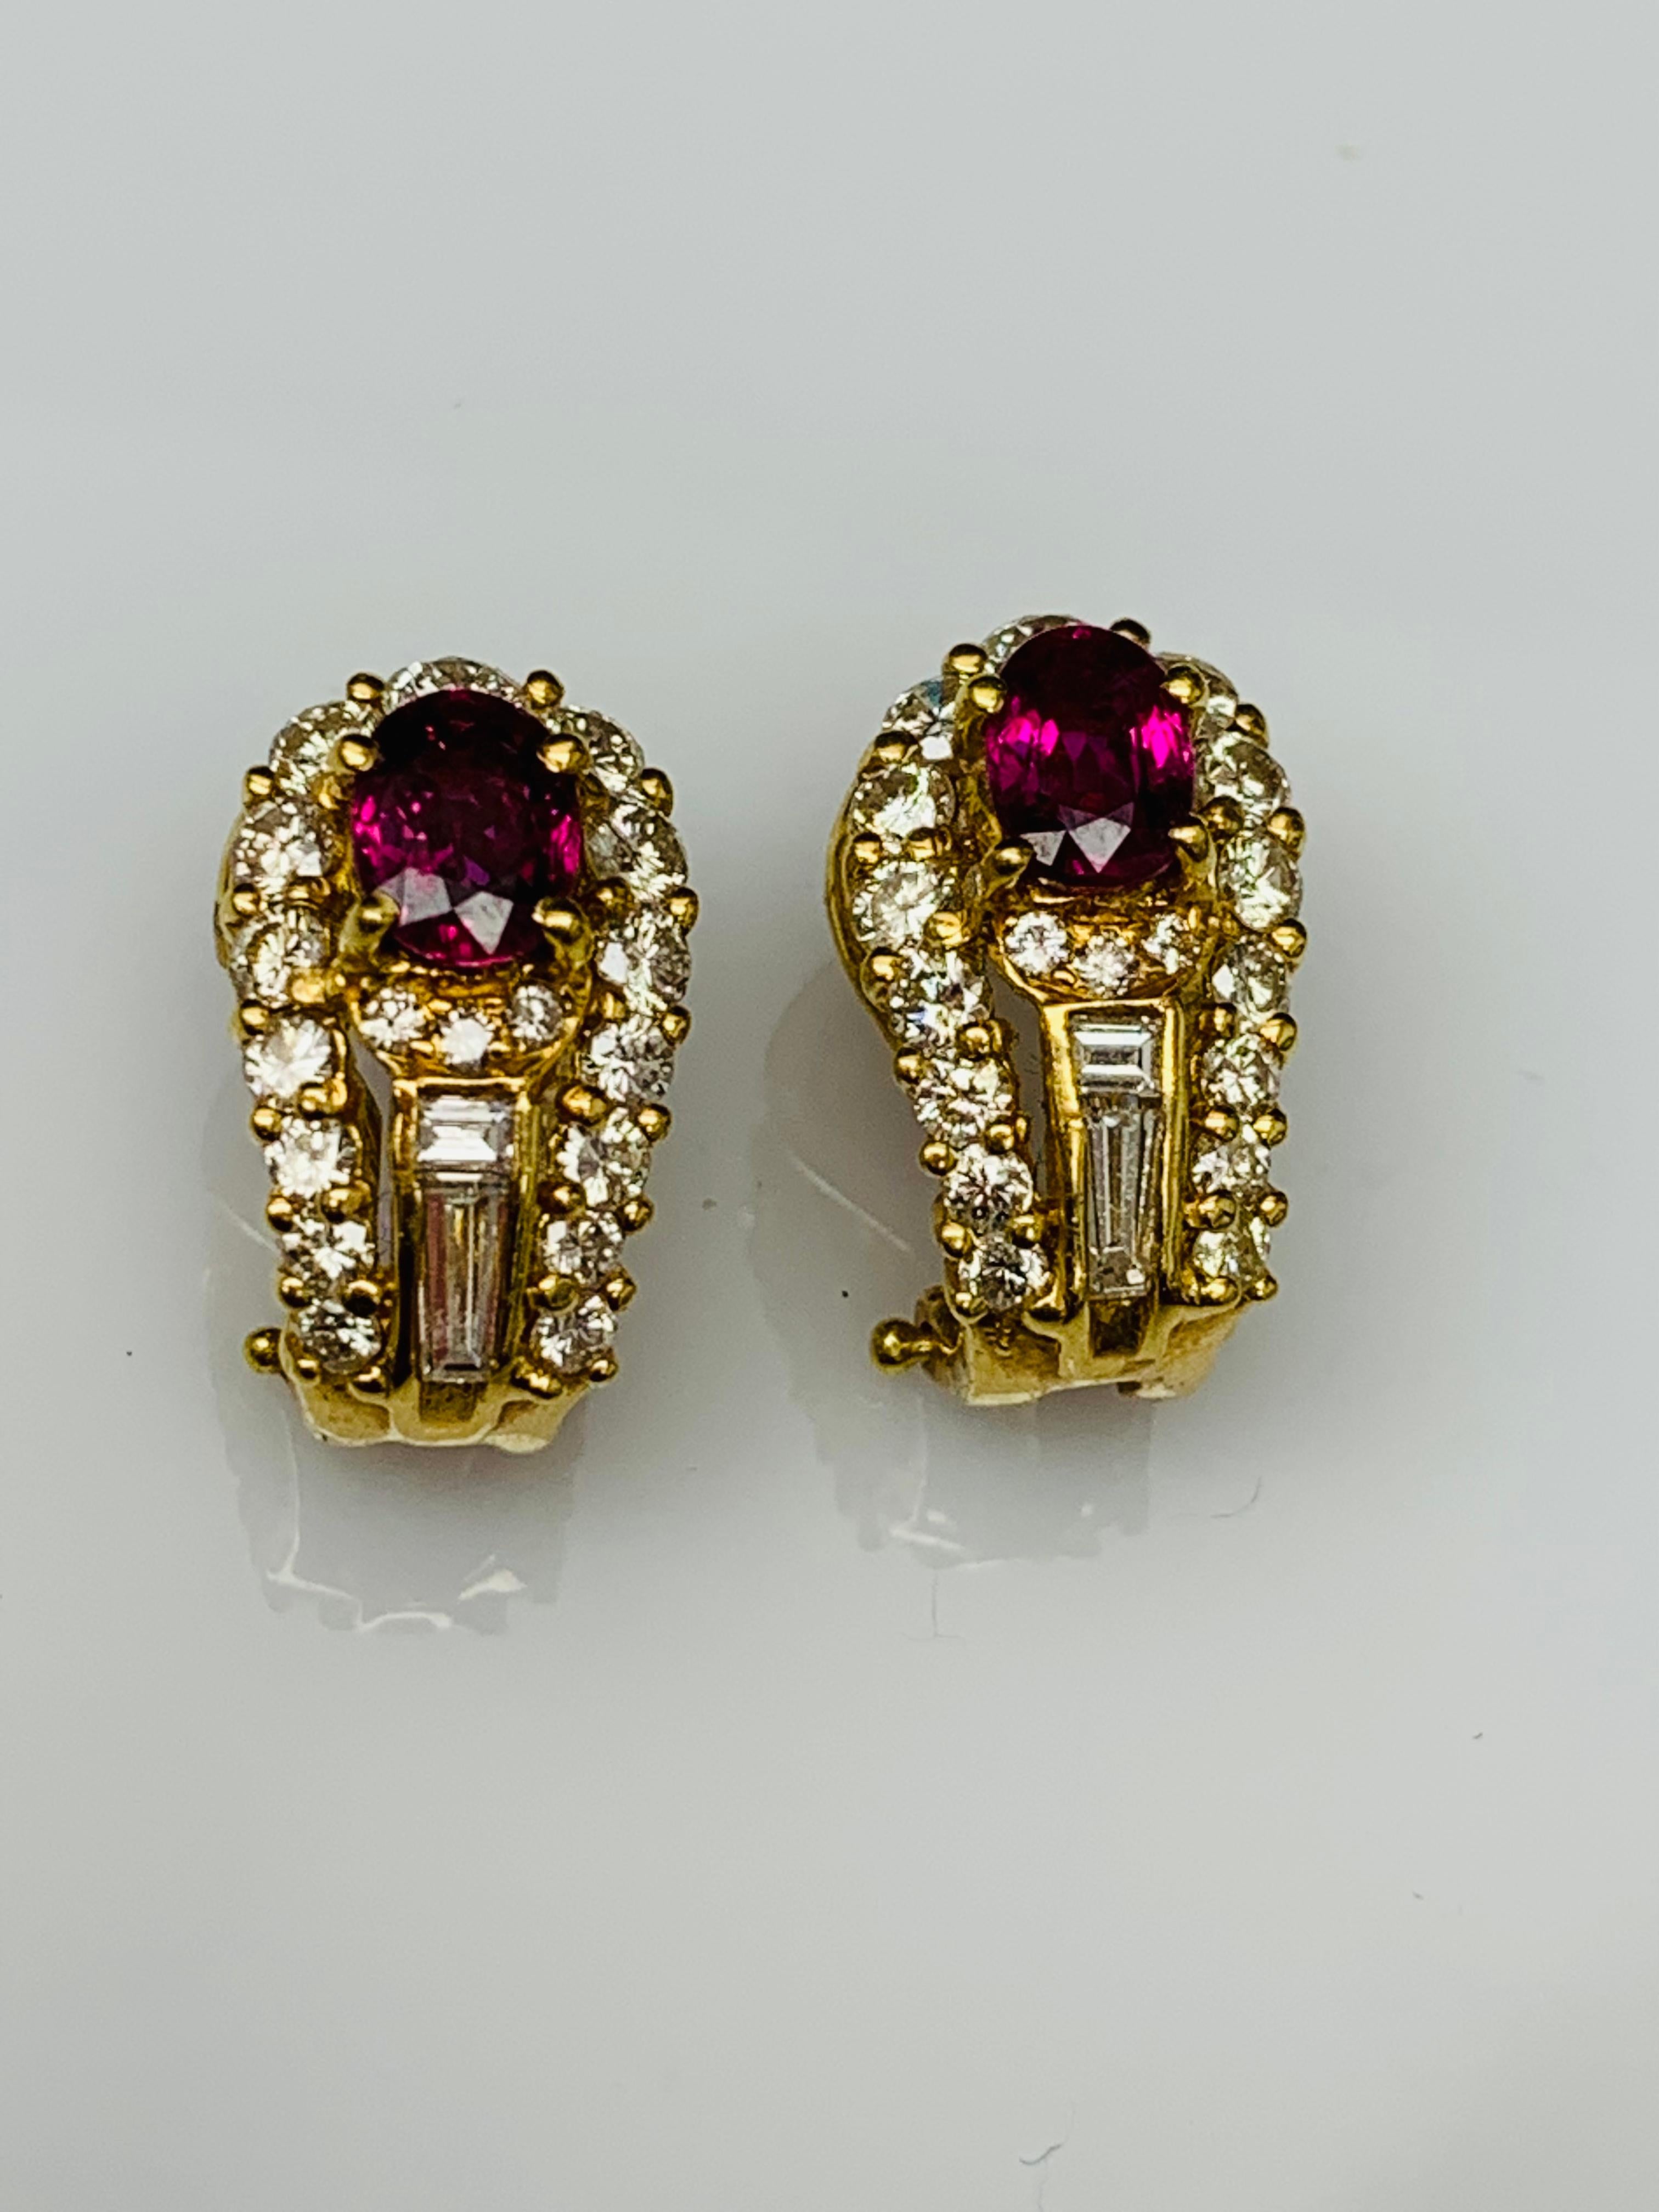 1.21 Carat Oval Cut Ruby and Diamond Earrings in 18K Yellow Gold For Sale 8